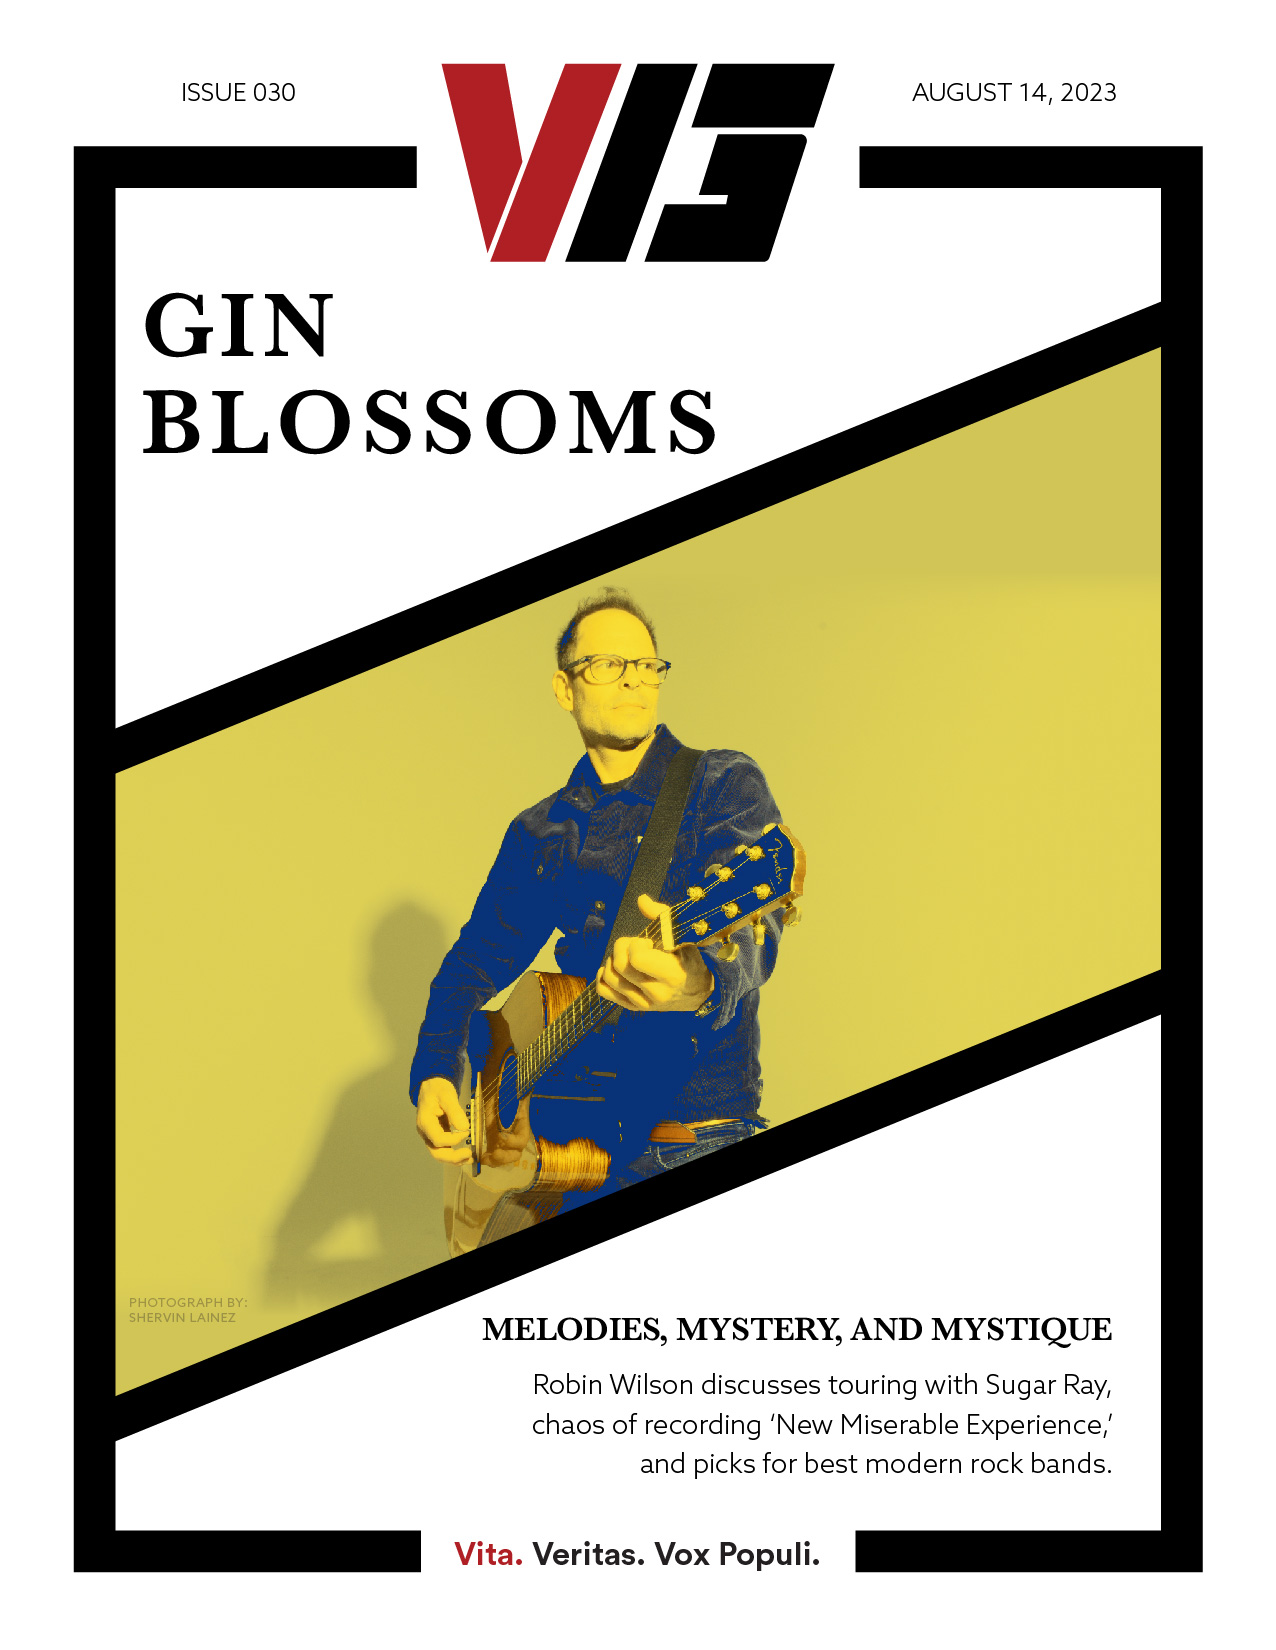 V13 Cover Story 030 - Gin Blossoms - August 14, 2023